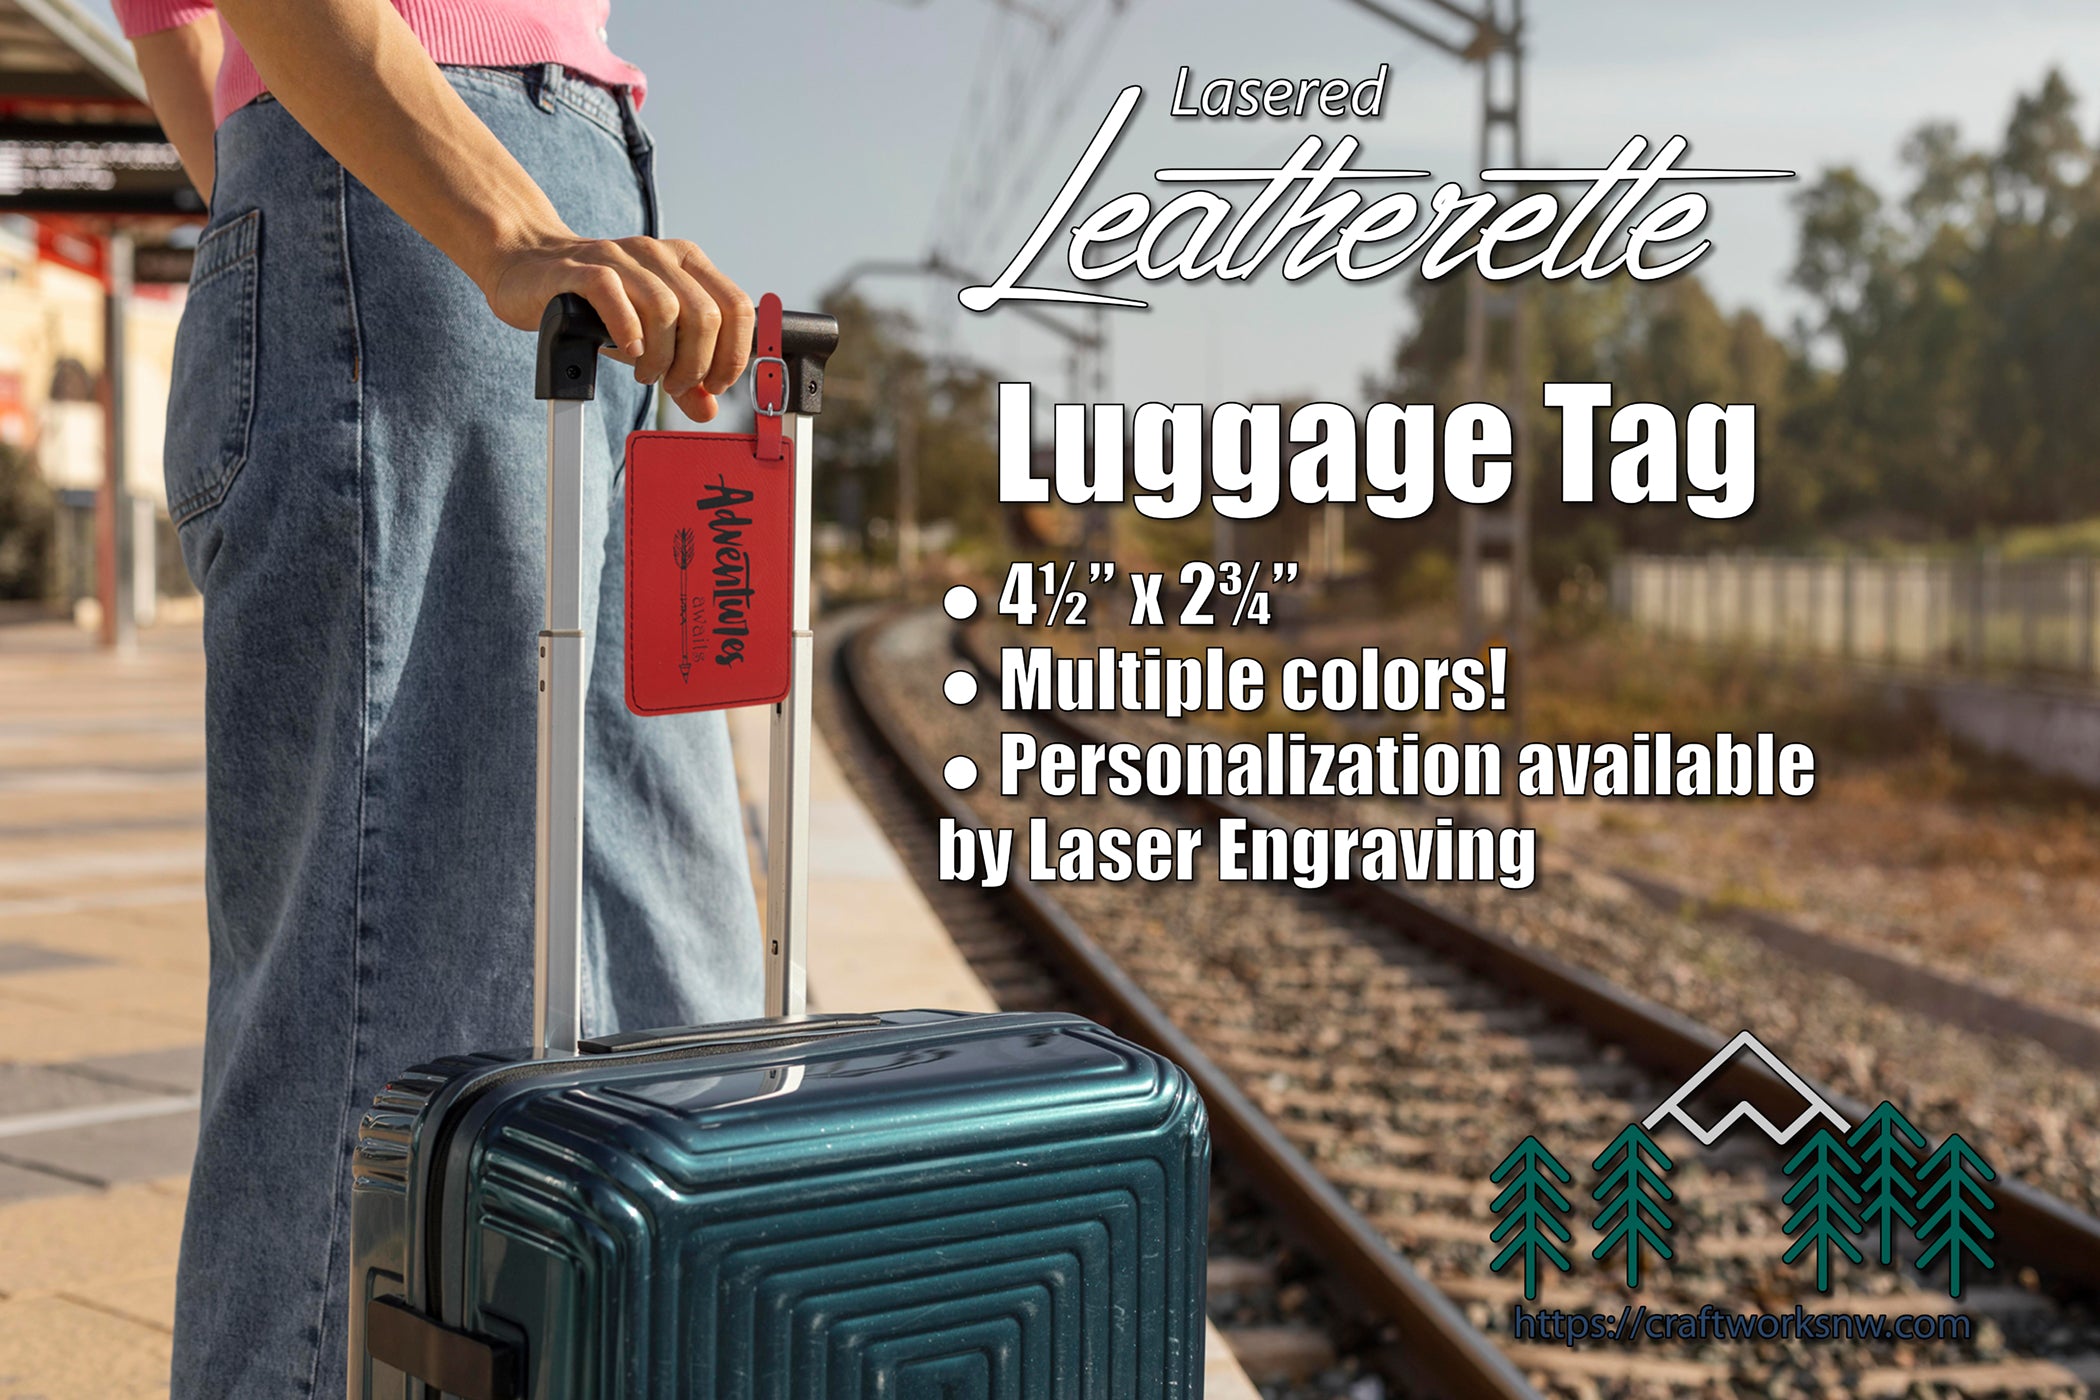 Luggage Tag, Laserable Leatherette, 4 1/4" x 2 3/4", Laser Engraved - Craftworks NW, LLC